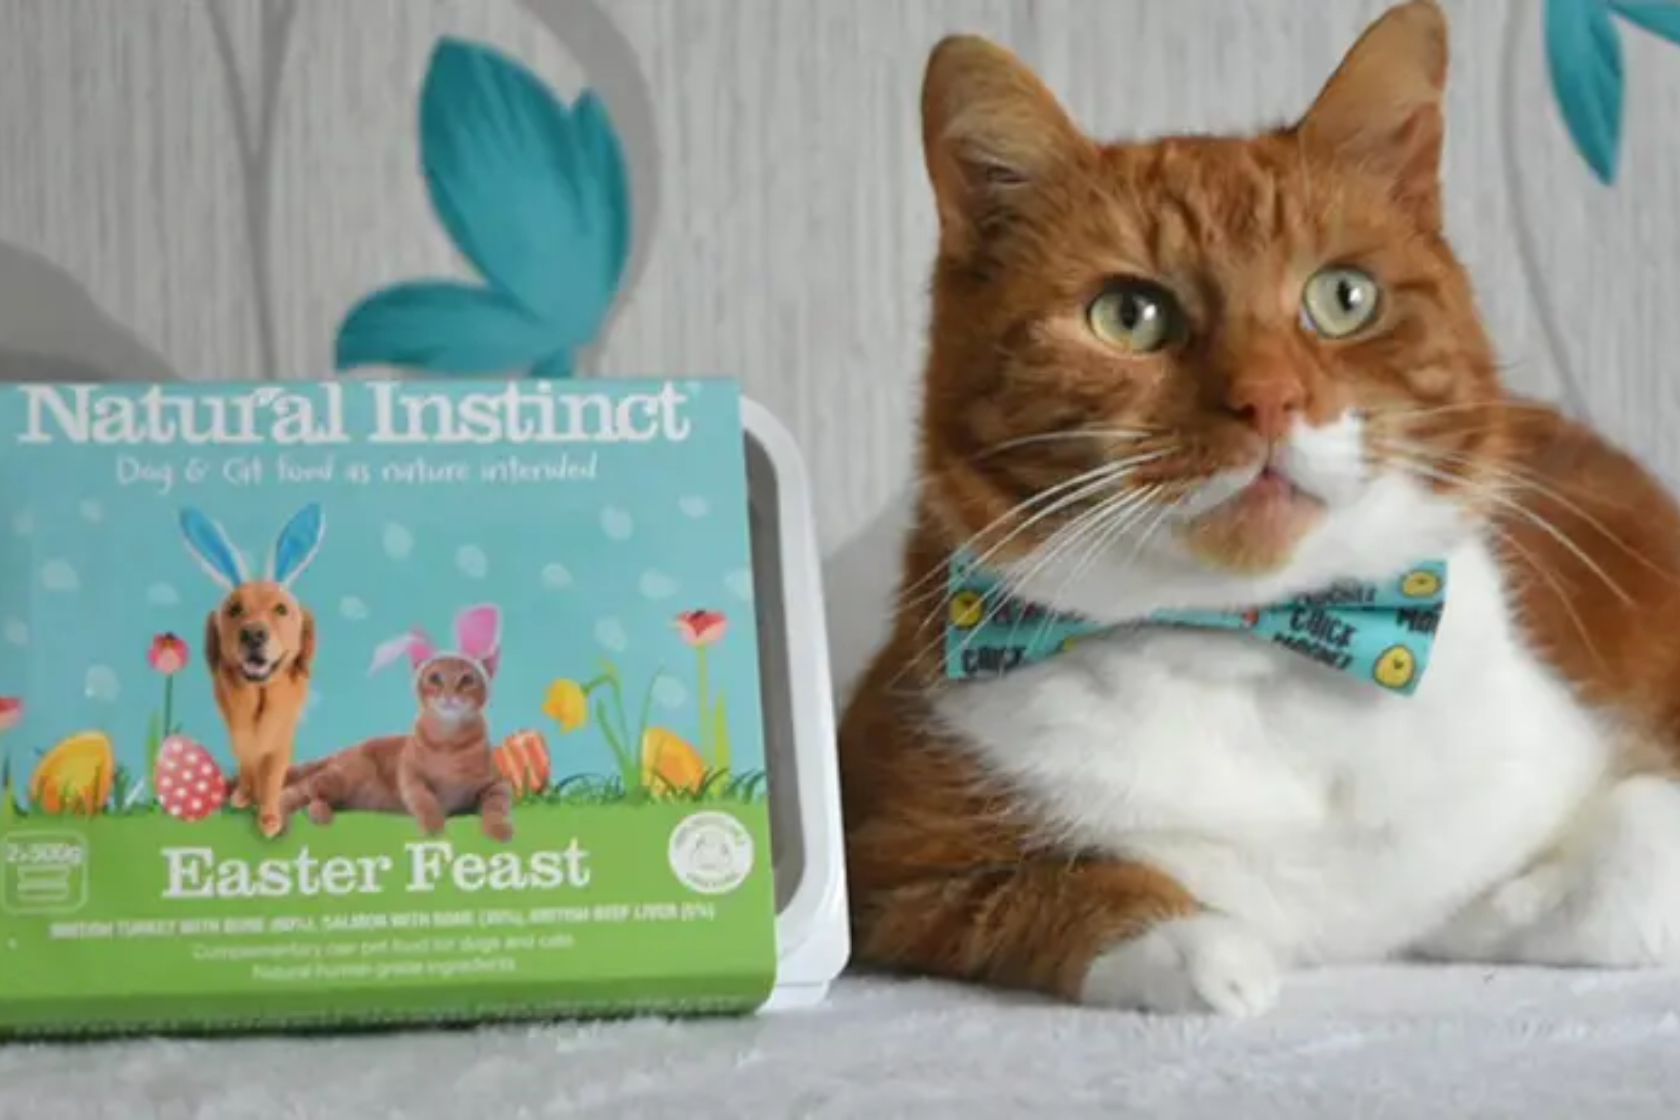 Cat wearing bow tie next to Natural Instinct Easter feast meal